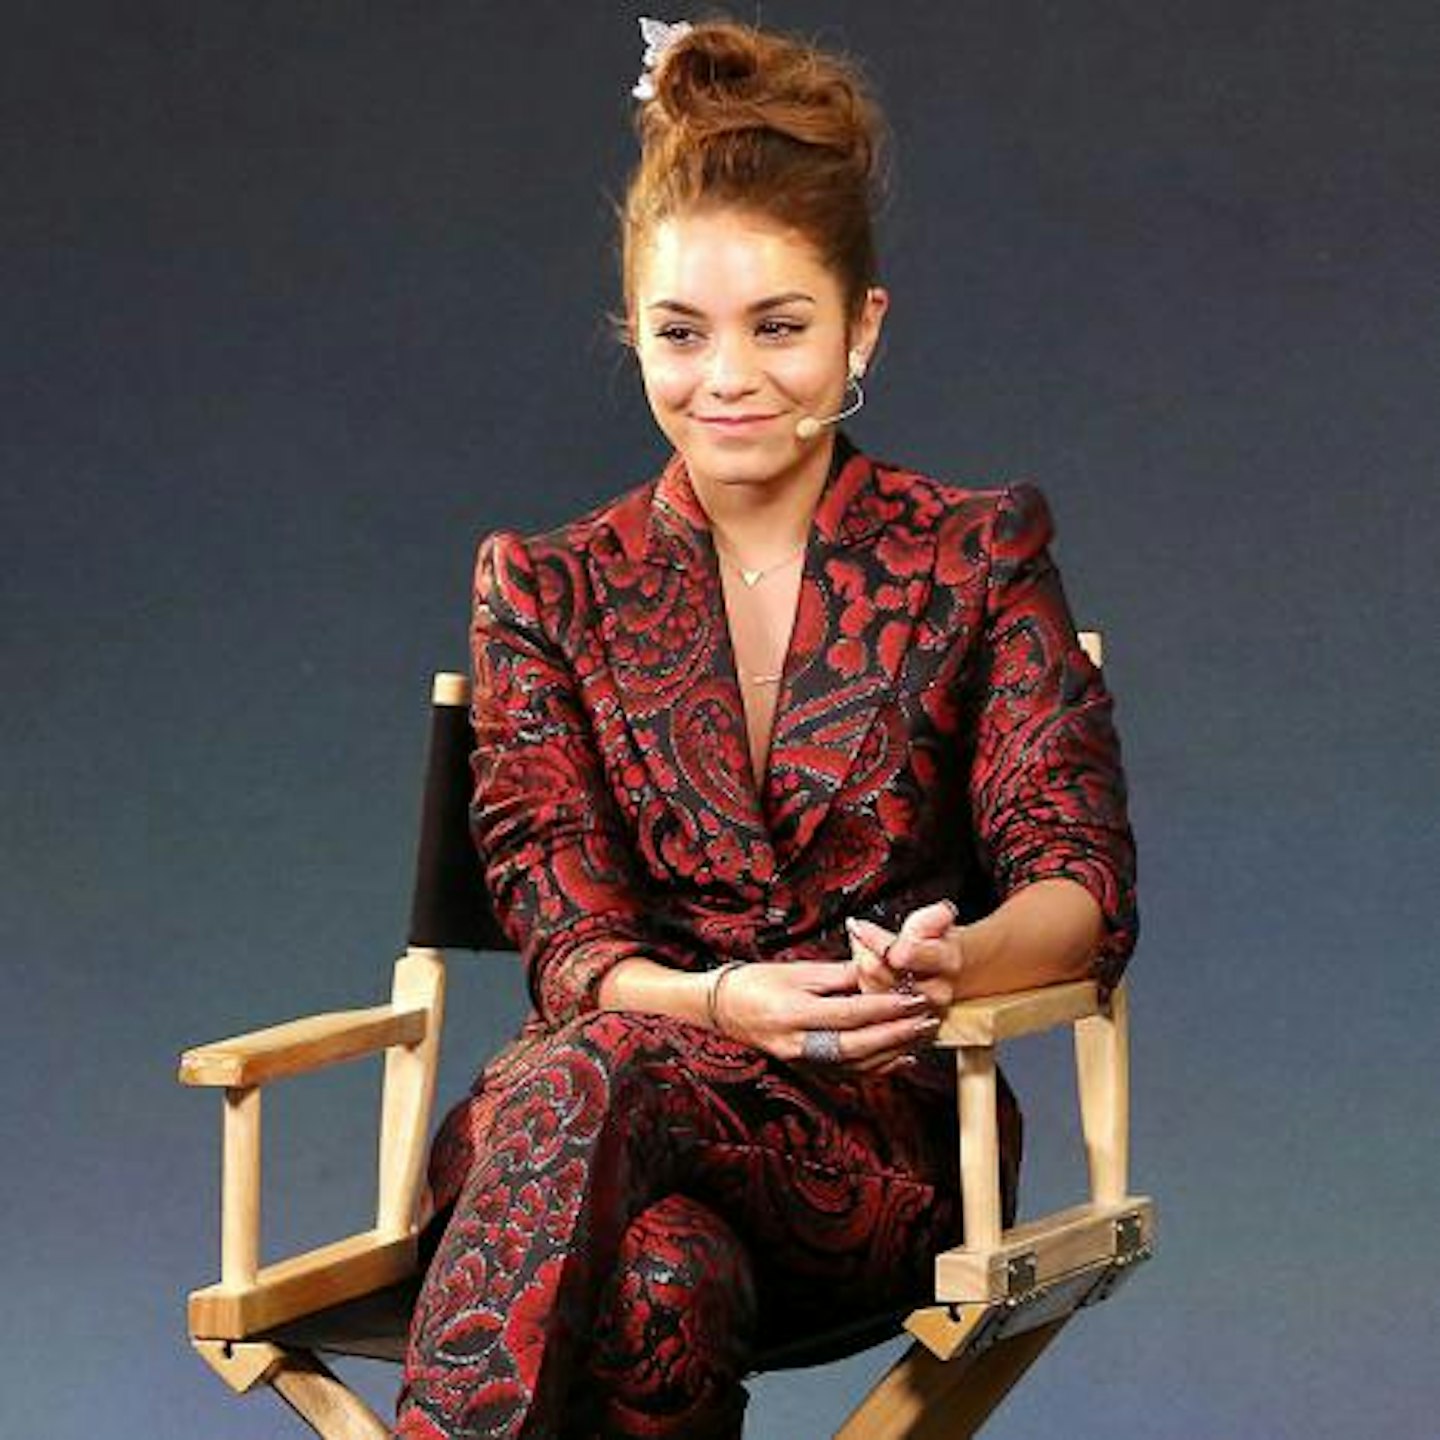 Vanessa speaking at a 'Meet the Actor' event in London yesterday